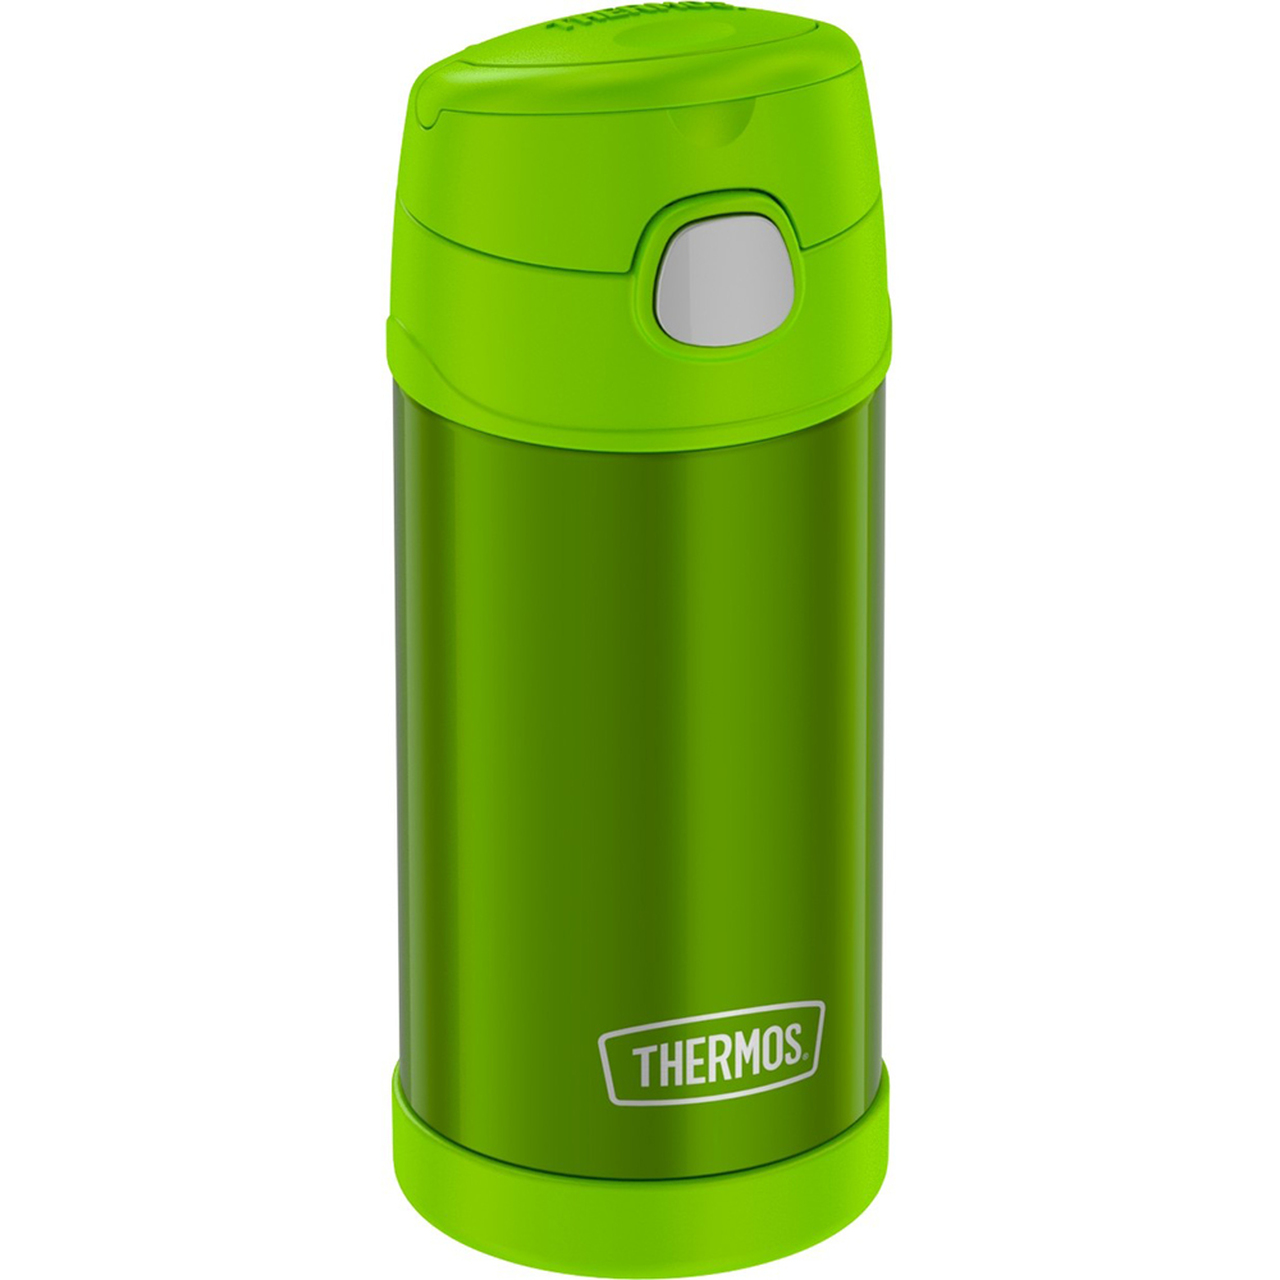 Thermos, 12 oz, Lime, Stainless Steel Fun Bottle